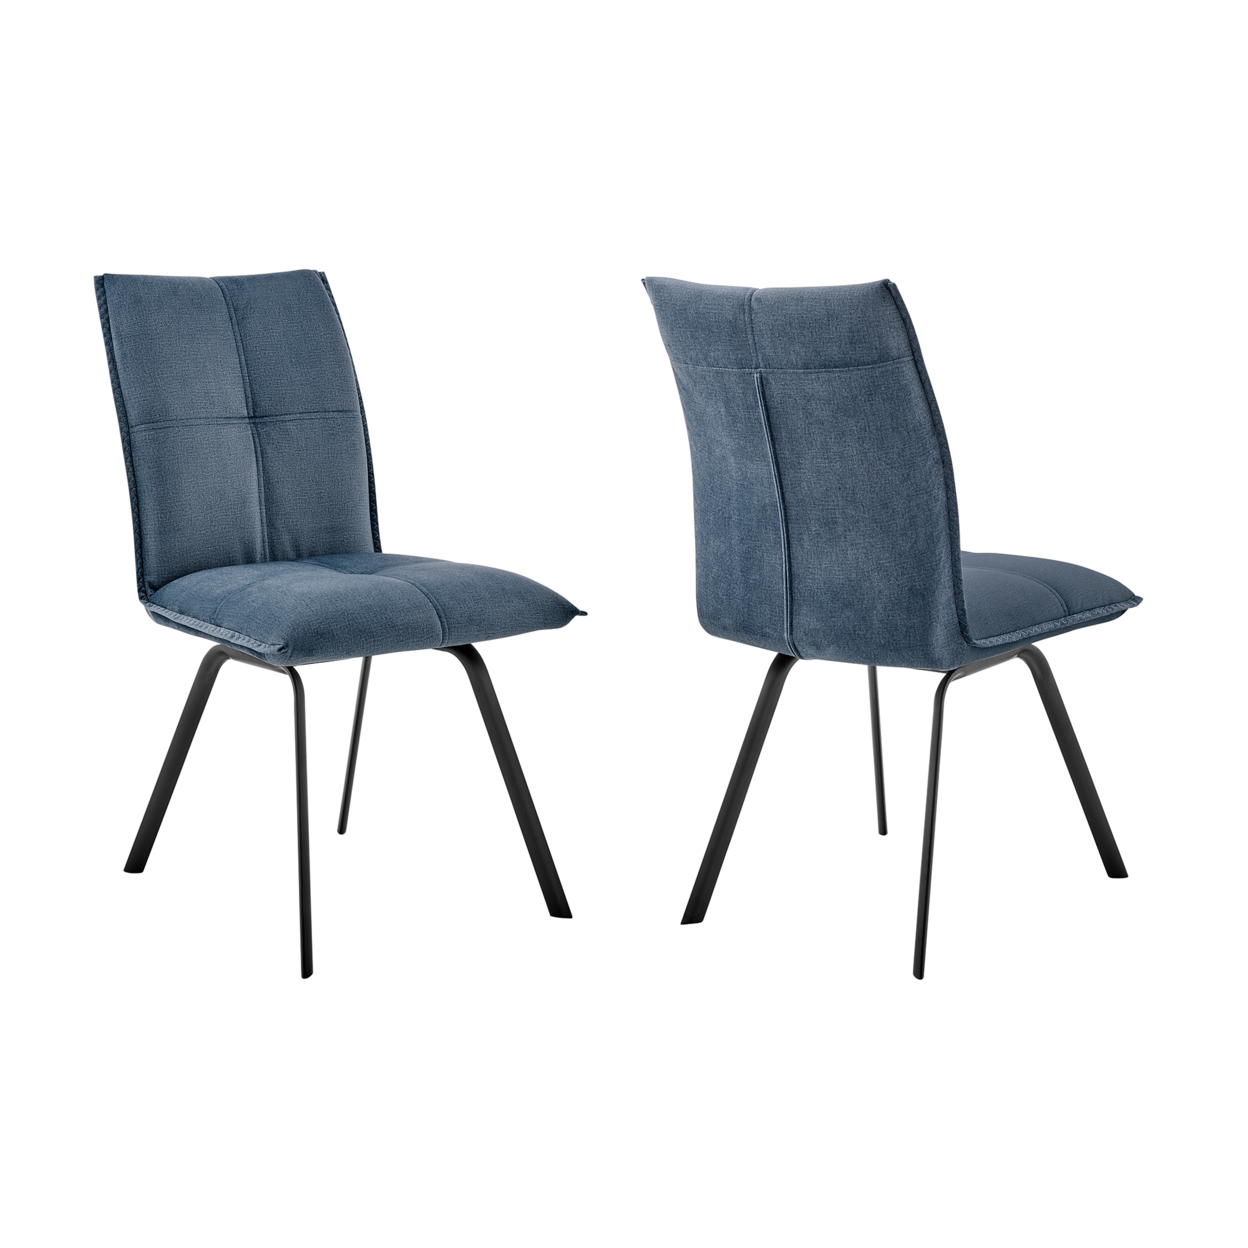 Dining Chair With Welt Trim Stitching, Set Of 2, Blue And Black- Saltoro Sherpi